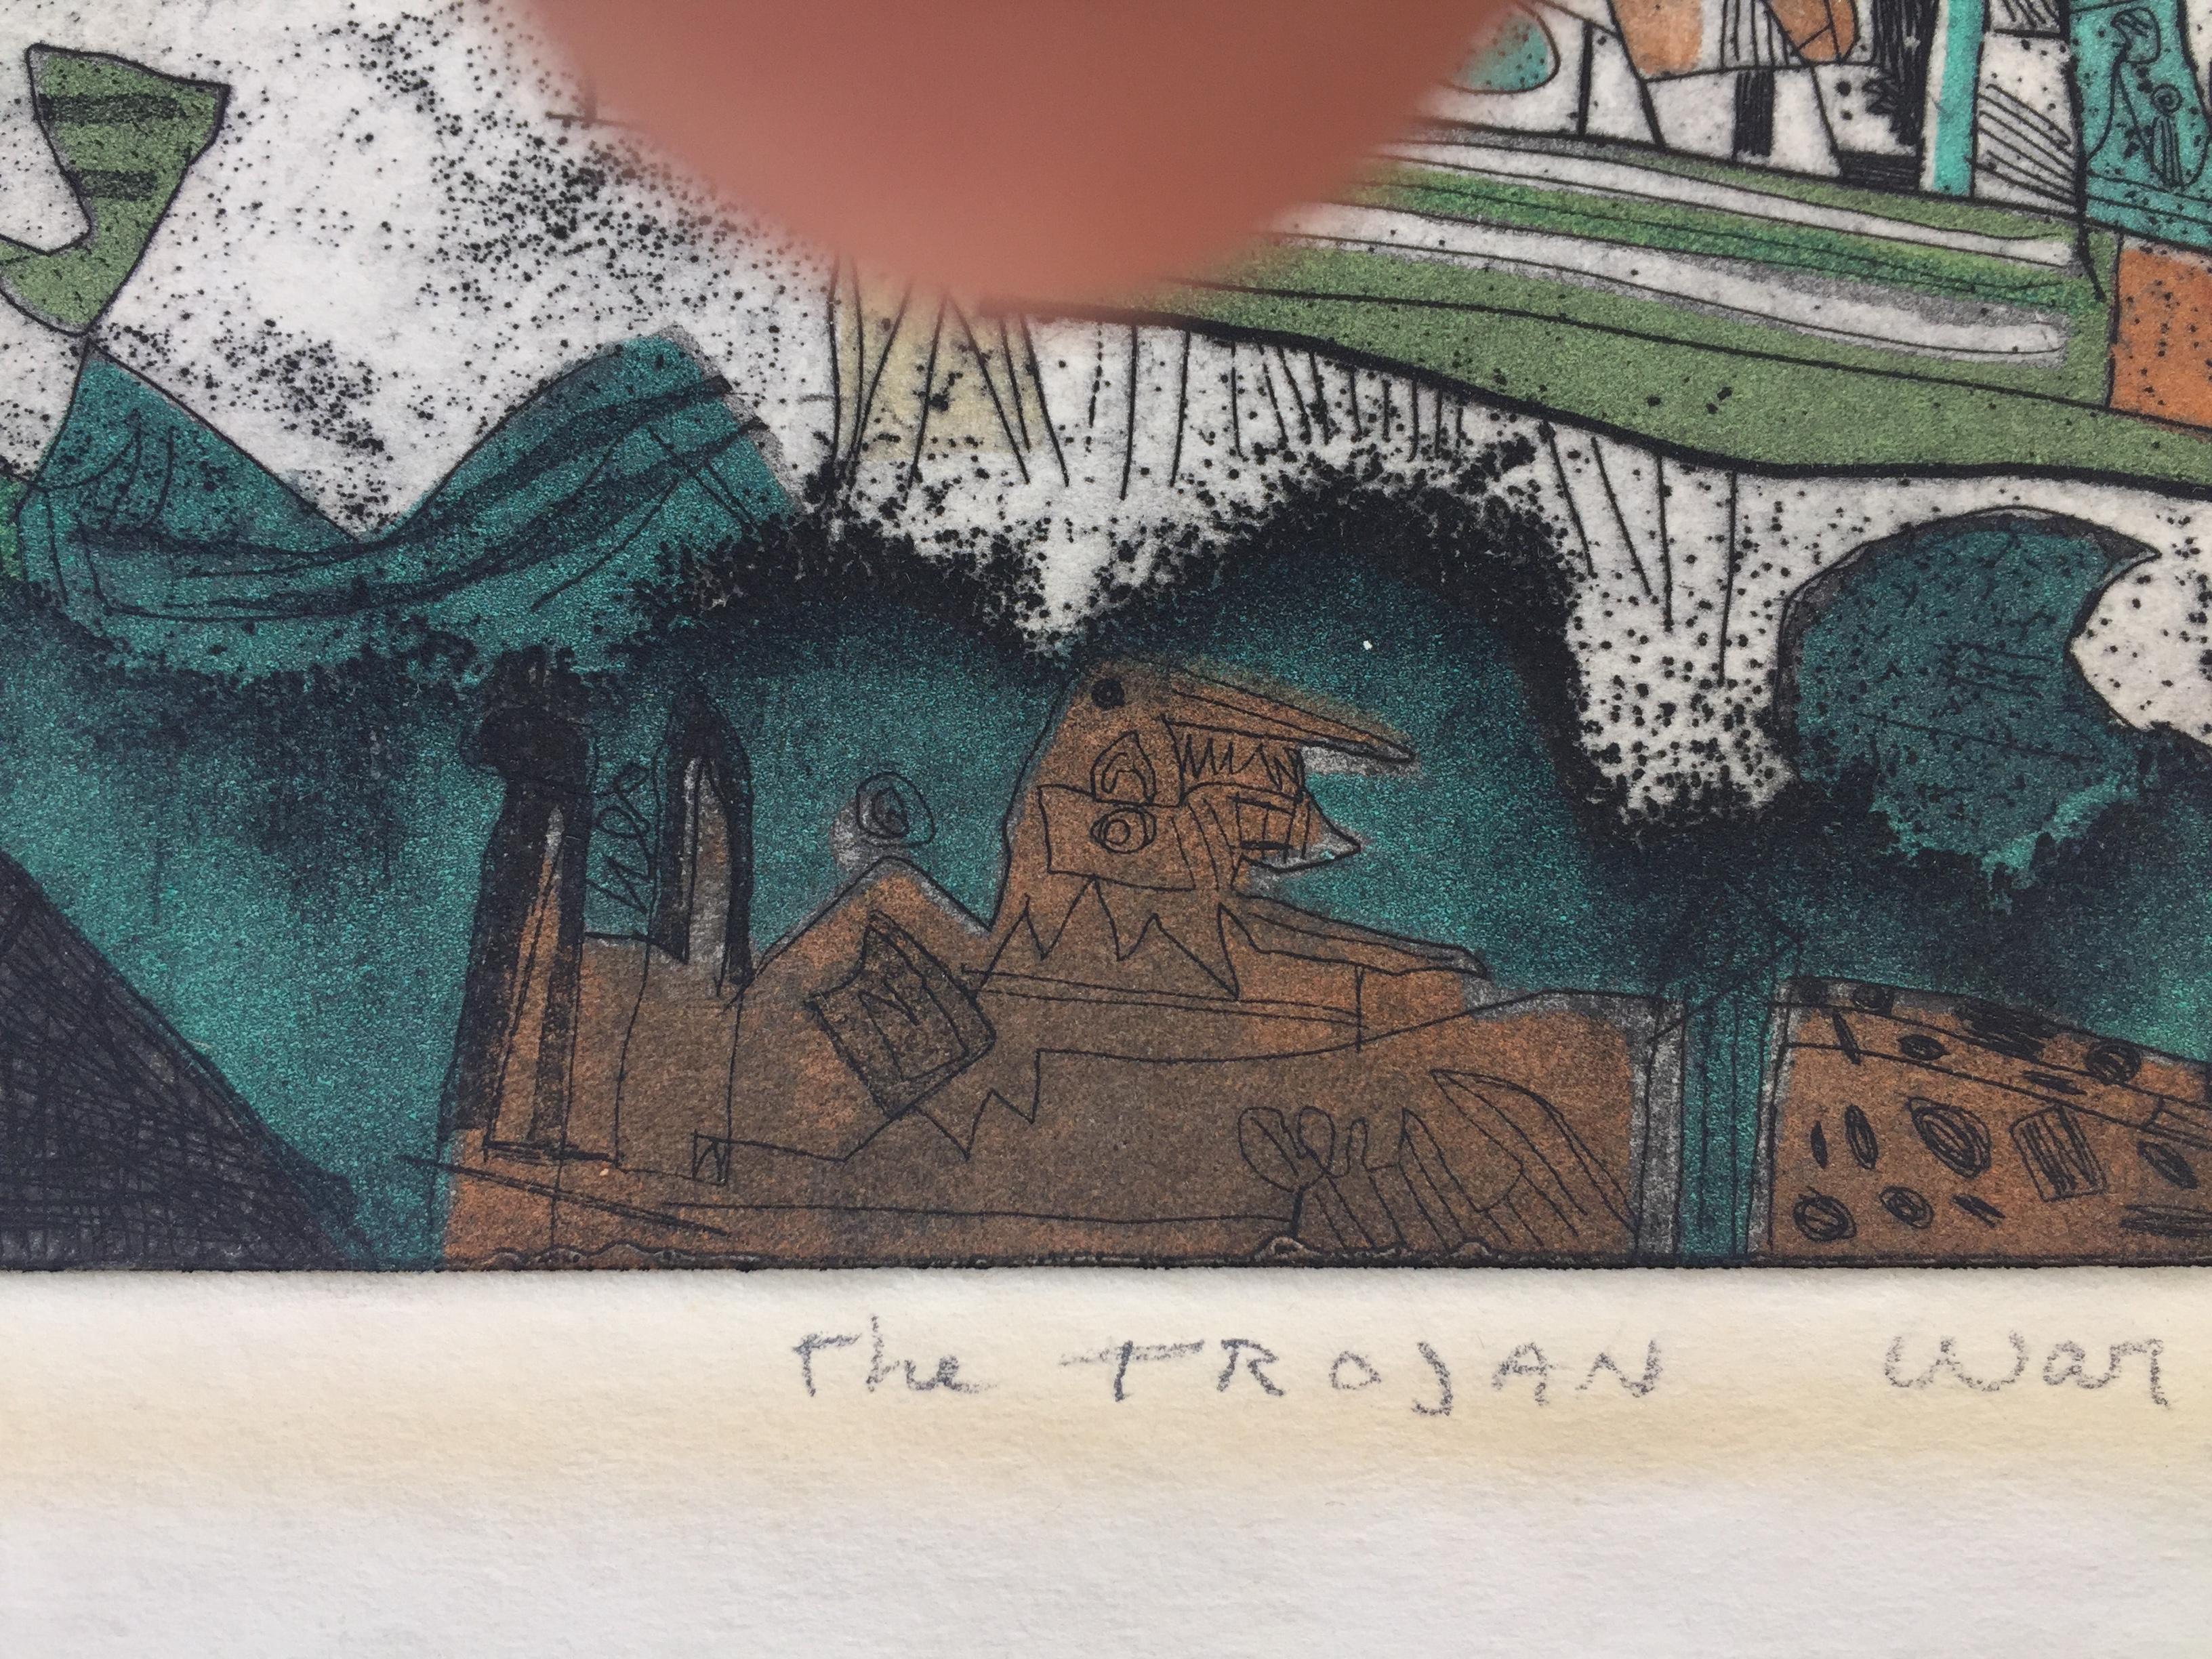 YNEZ JOHNSTON (b. 1920 - )

          THE TROJAN WAR  c. 1954
          Color etching, Signed, titled and numbered 15/35 in pencil.  12 1/2 x 17 3/4, sheet 17 3/4  x 22 1/2 
          inches. Ring of mat burn around the image in the margins, slight